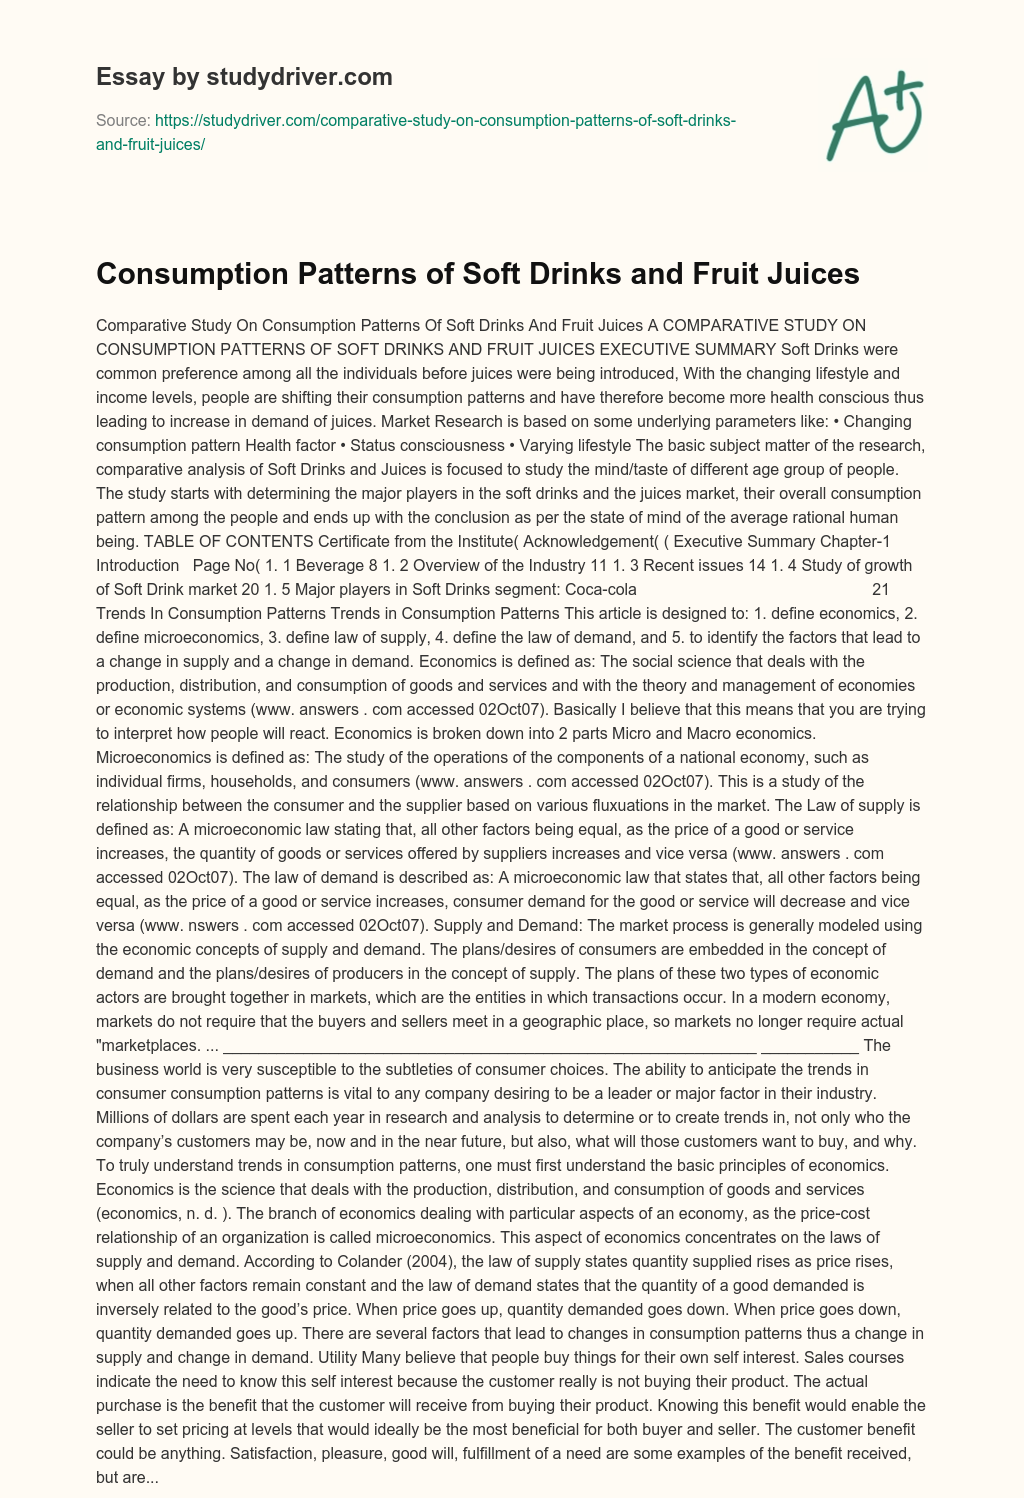 Consumption Patterns of Soft Drinks and Fruit Juices essay